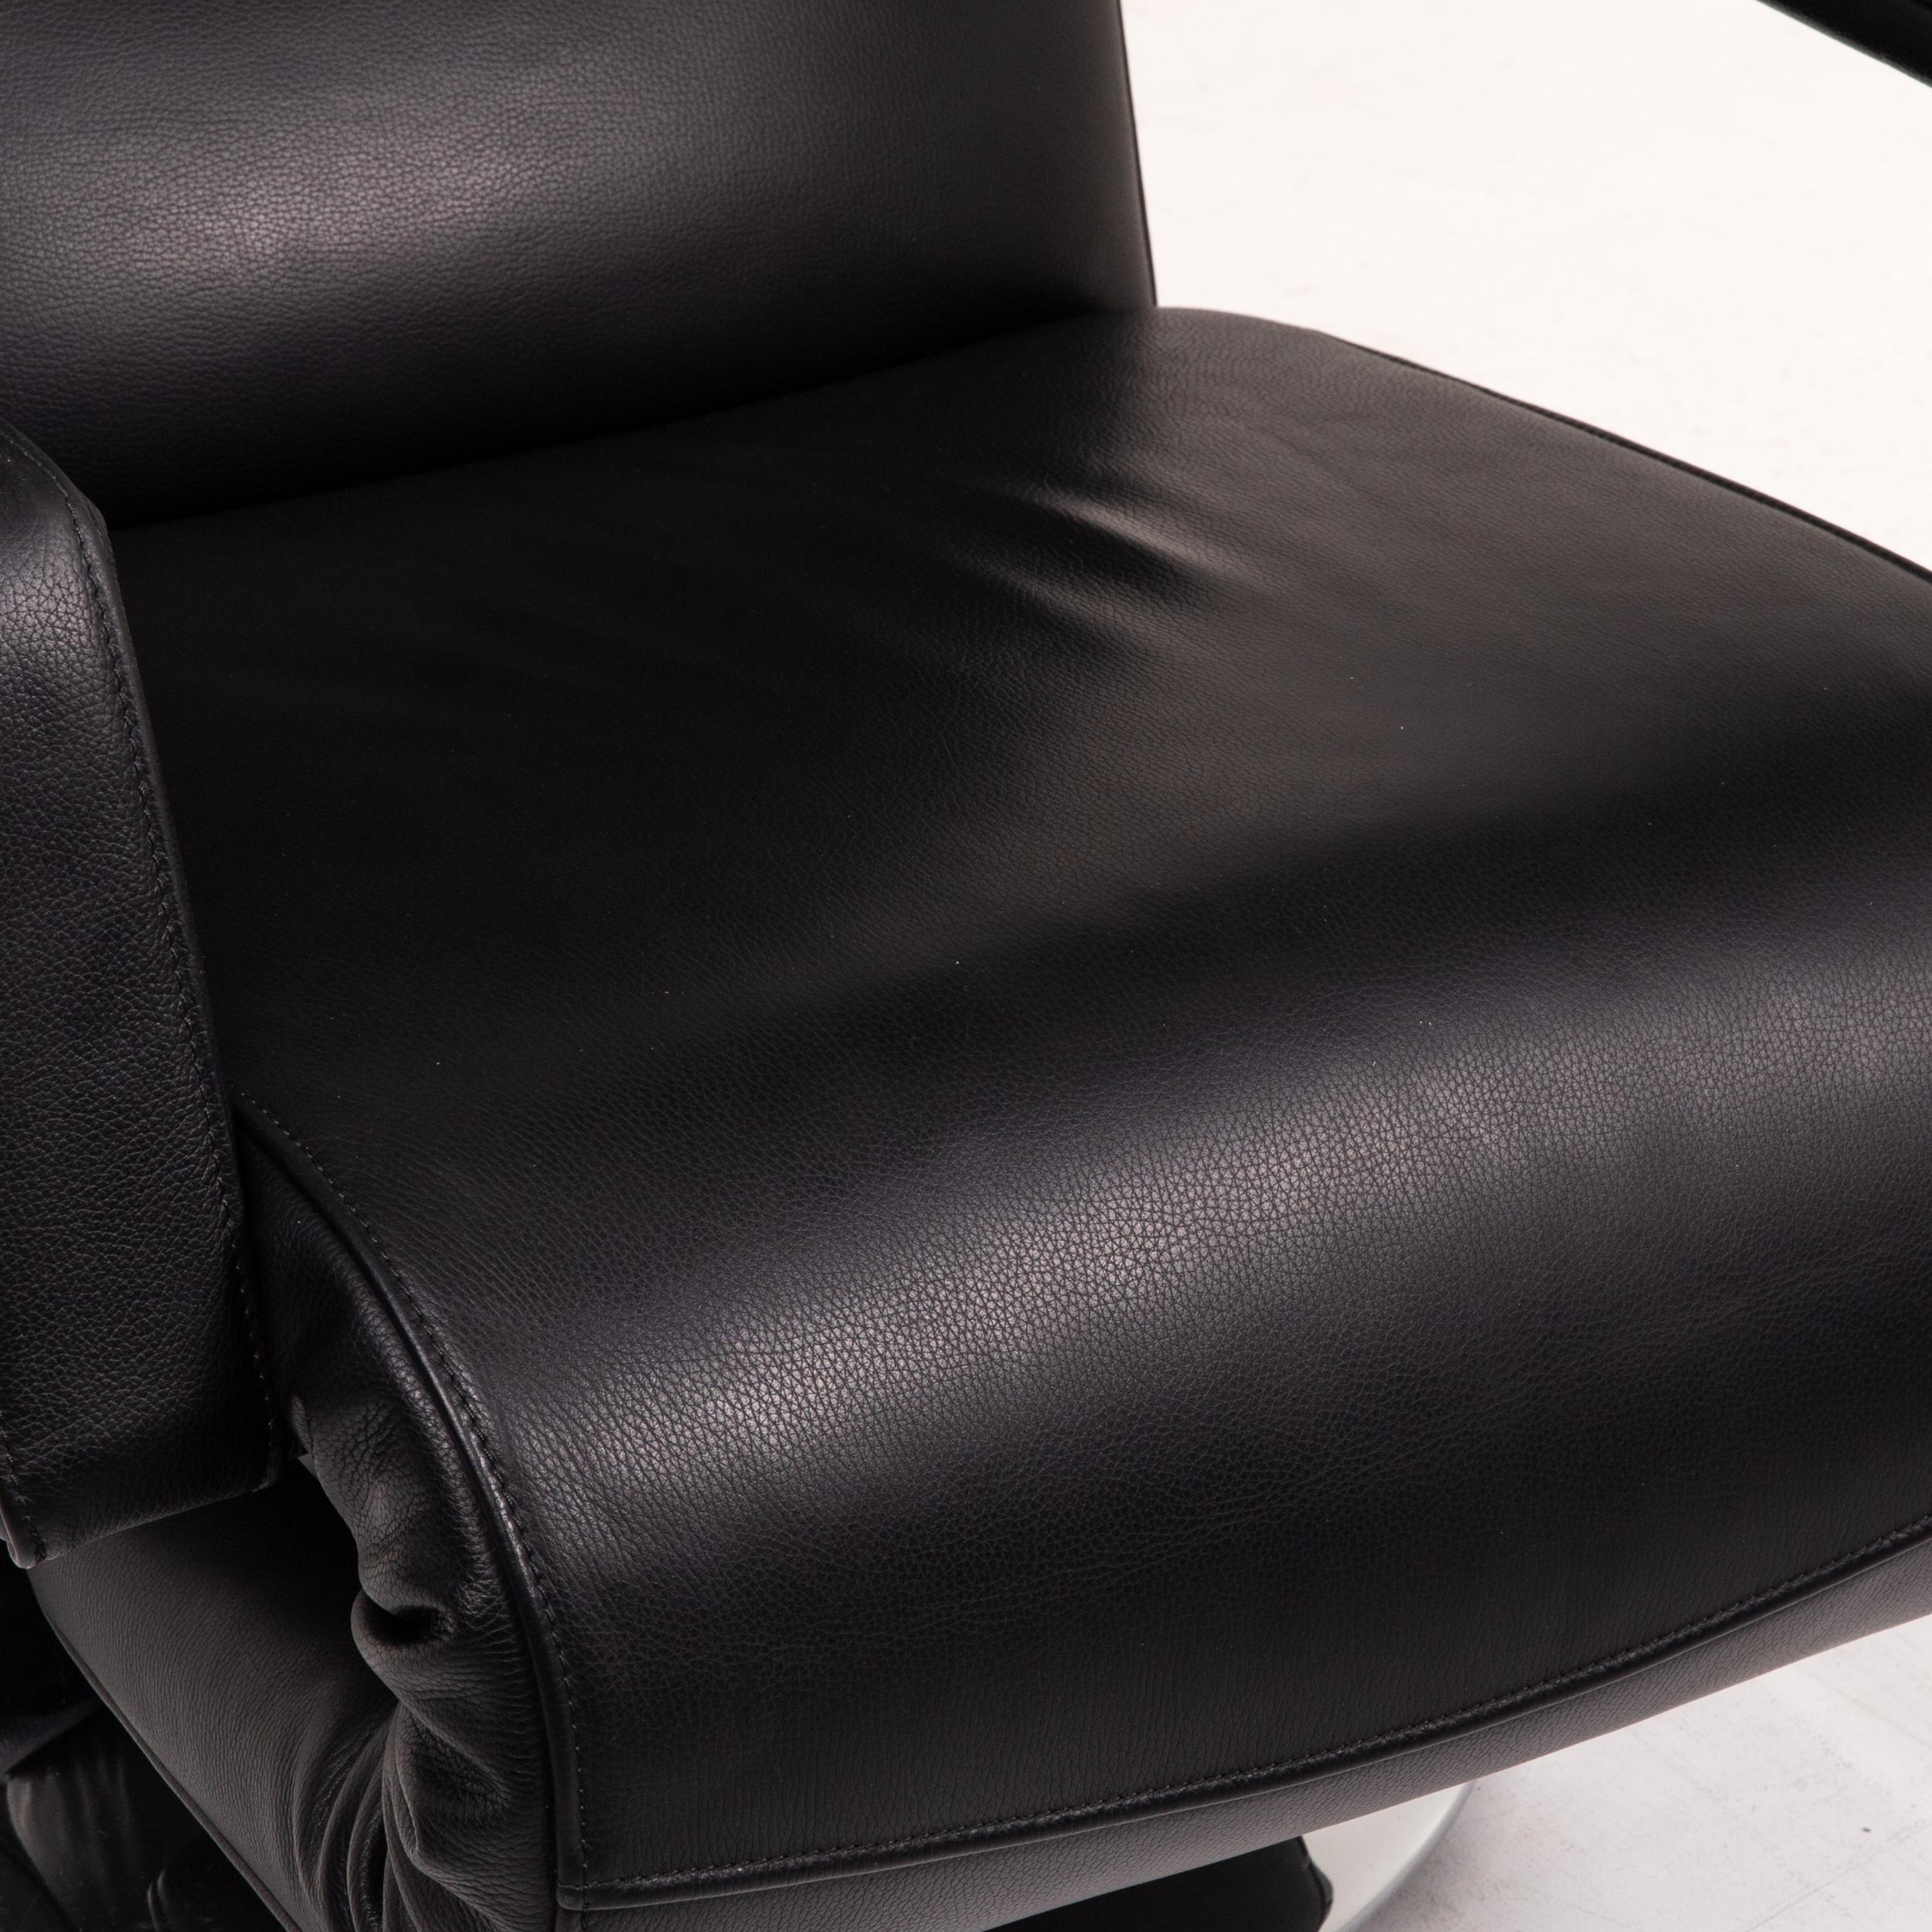 Swiss Fsm Evolo Leather Armchair Black Electrical Function Relax Function Recliner